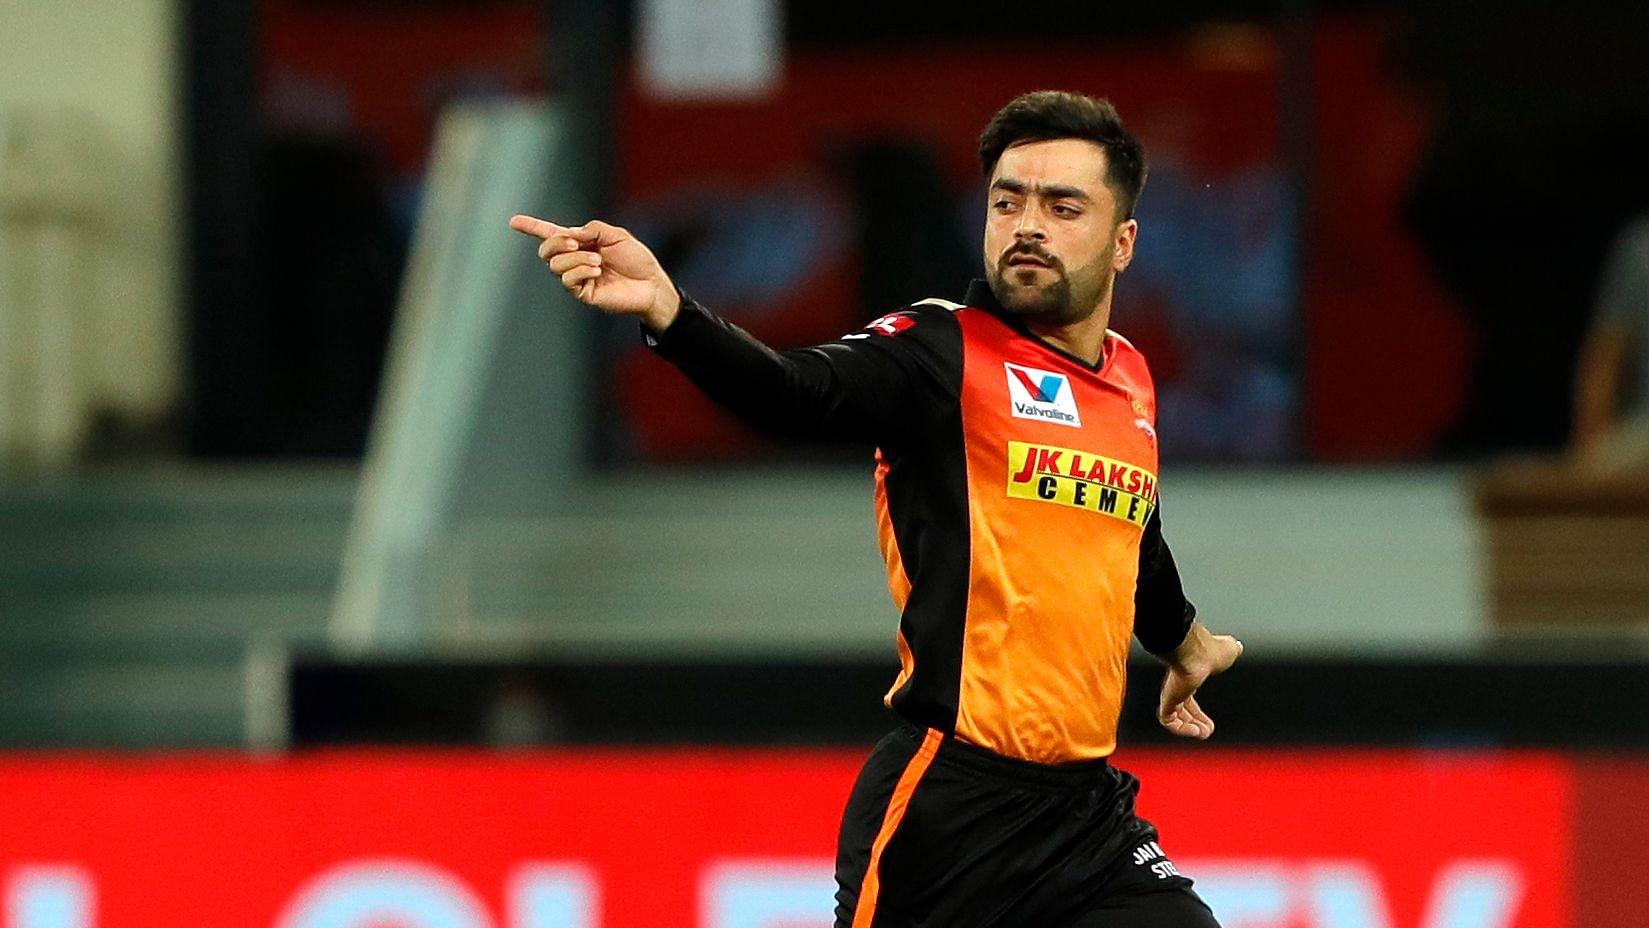 Rashid Khan finished with 3/7, including a whopping 17 dot balls in his four overs vs Delhi Capitals.